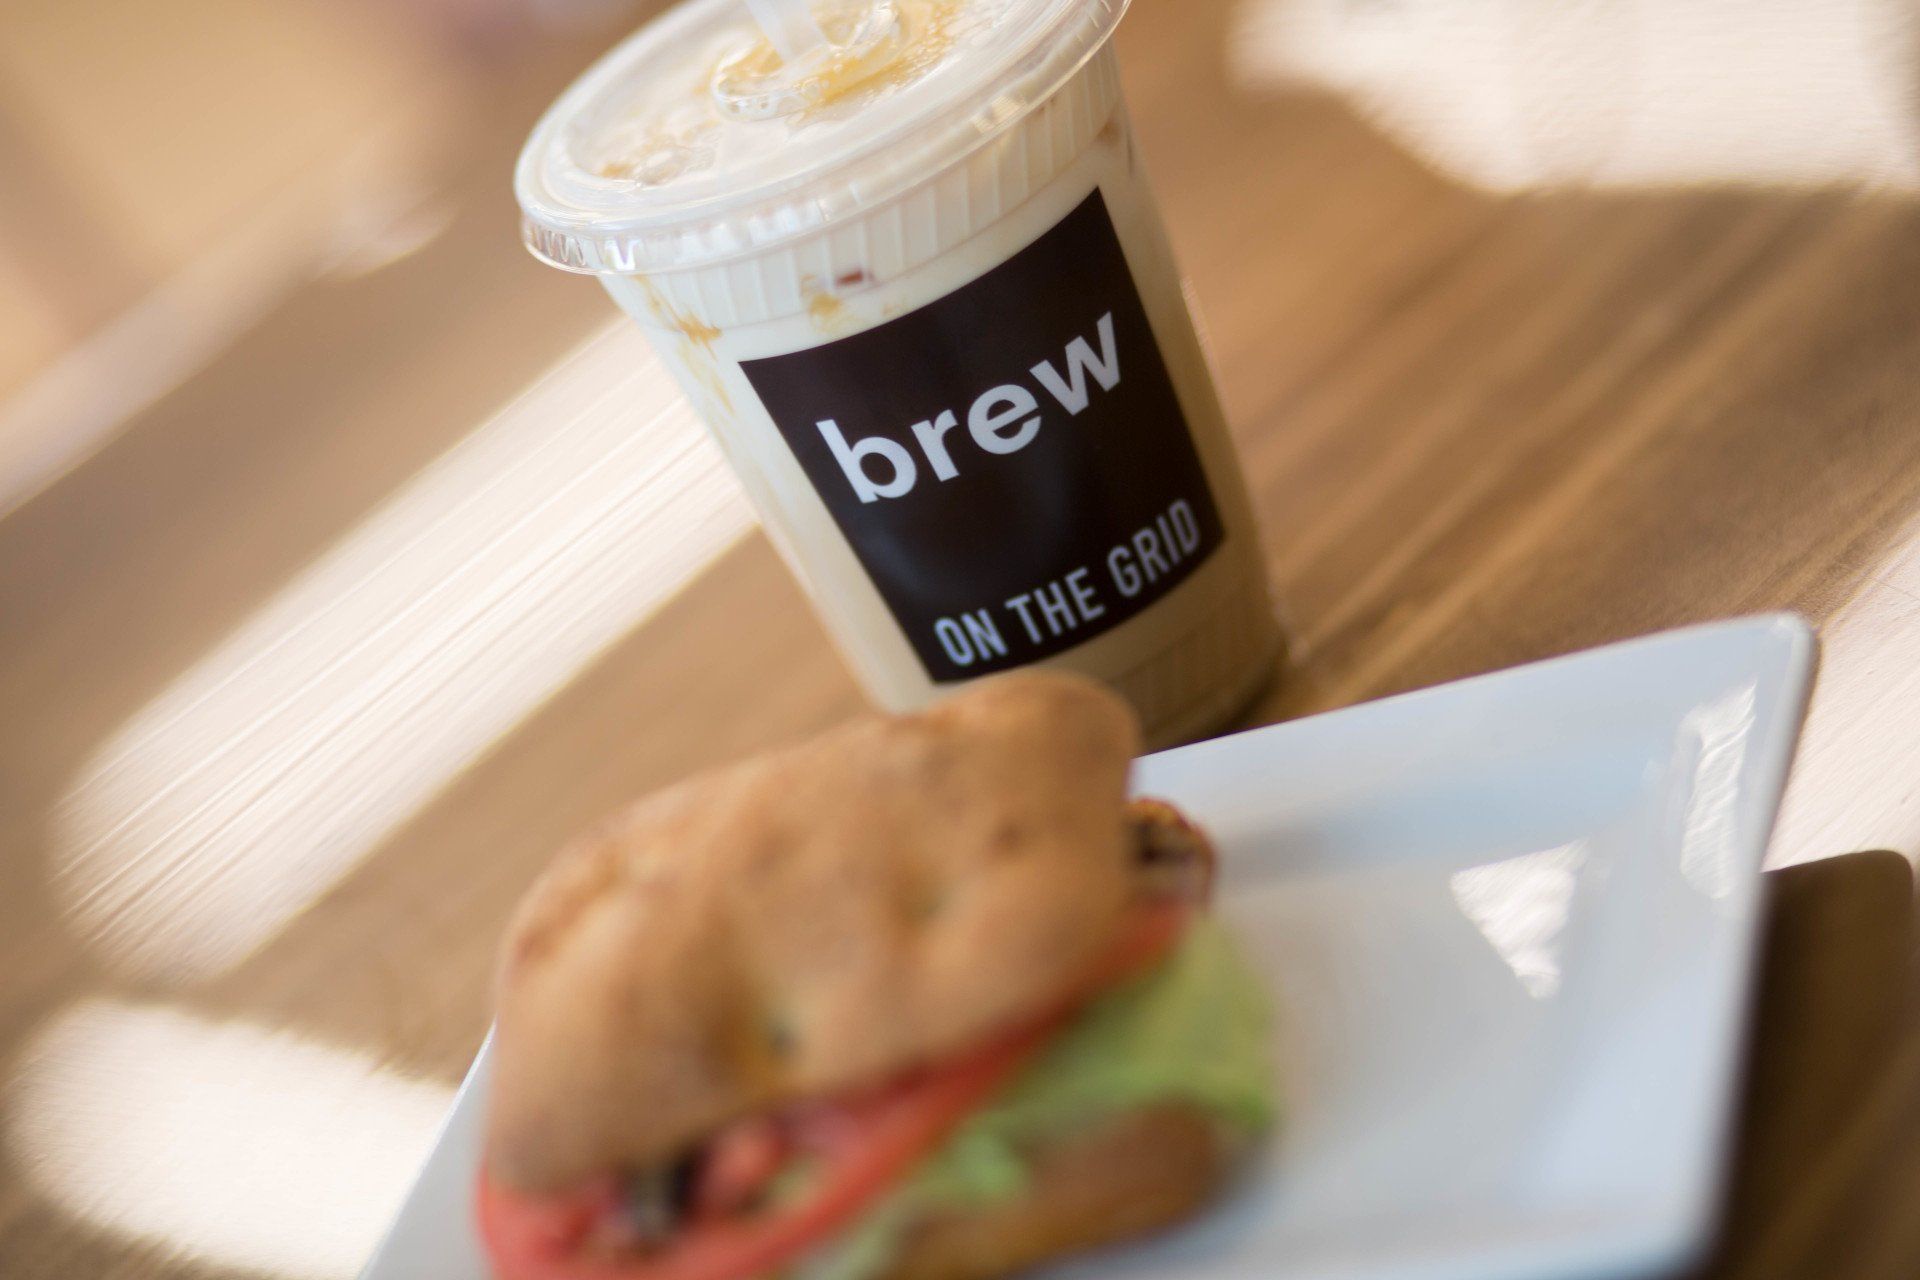 brew on the grid - image of coffee and sandwich